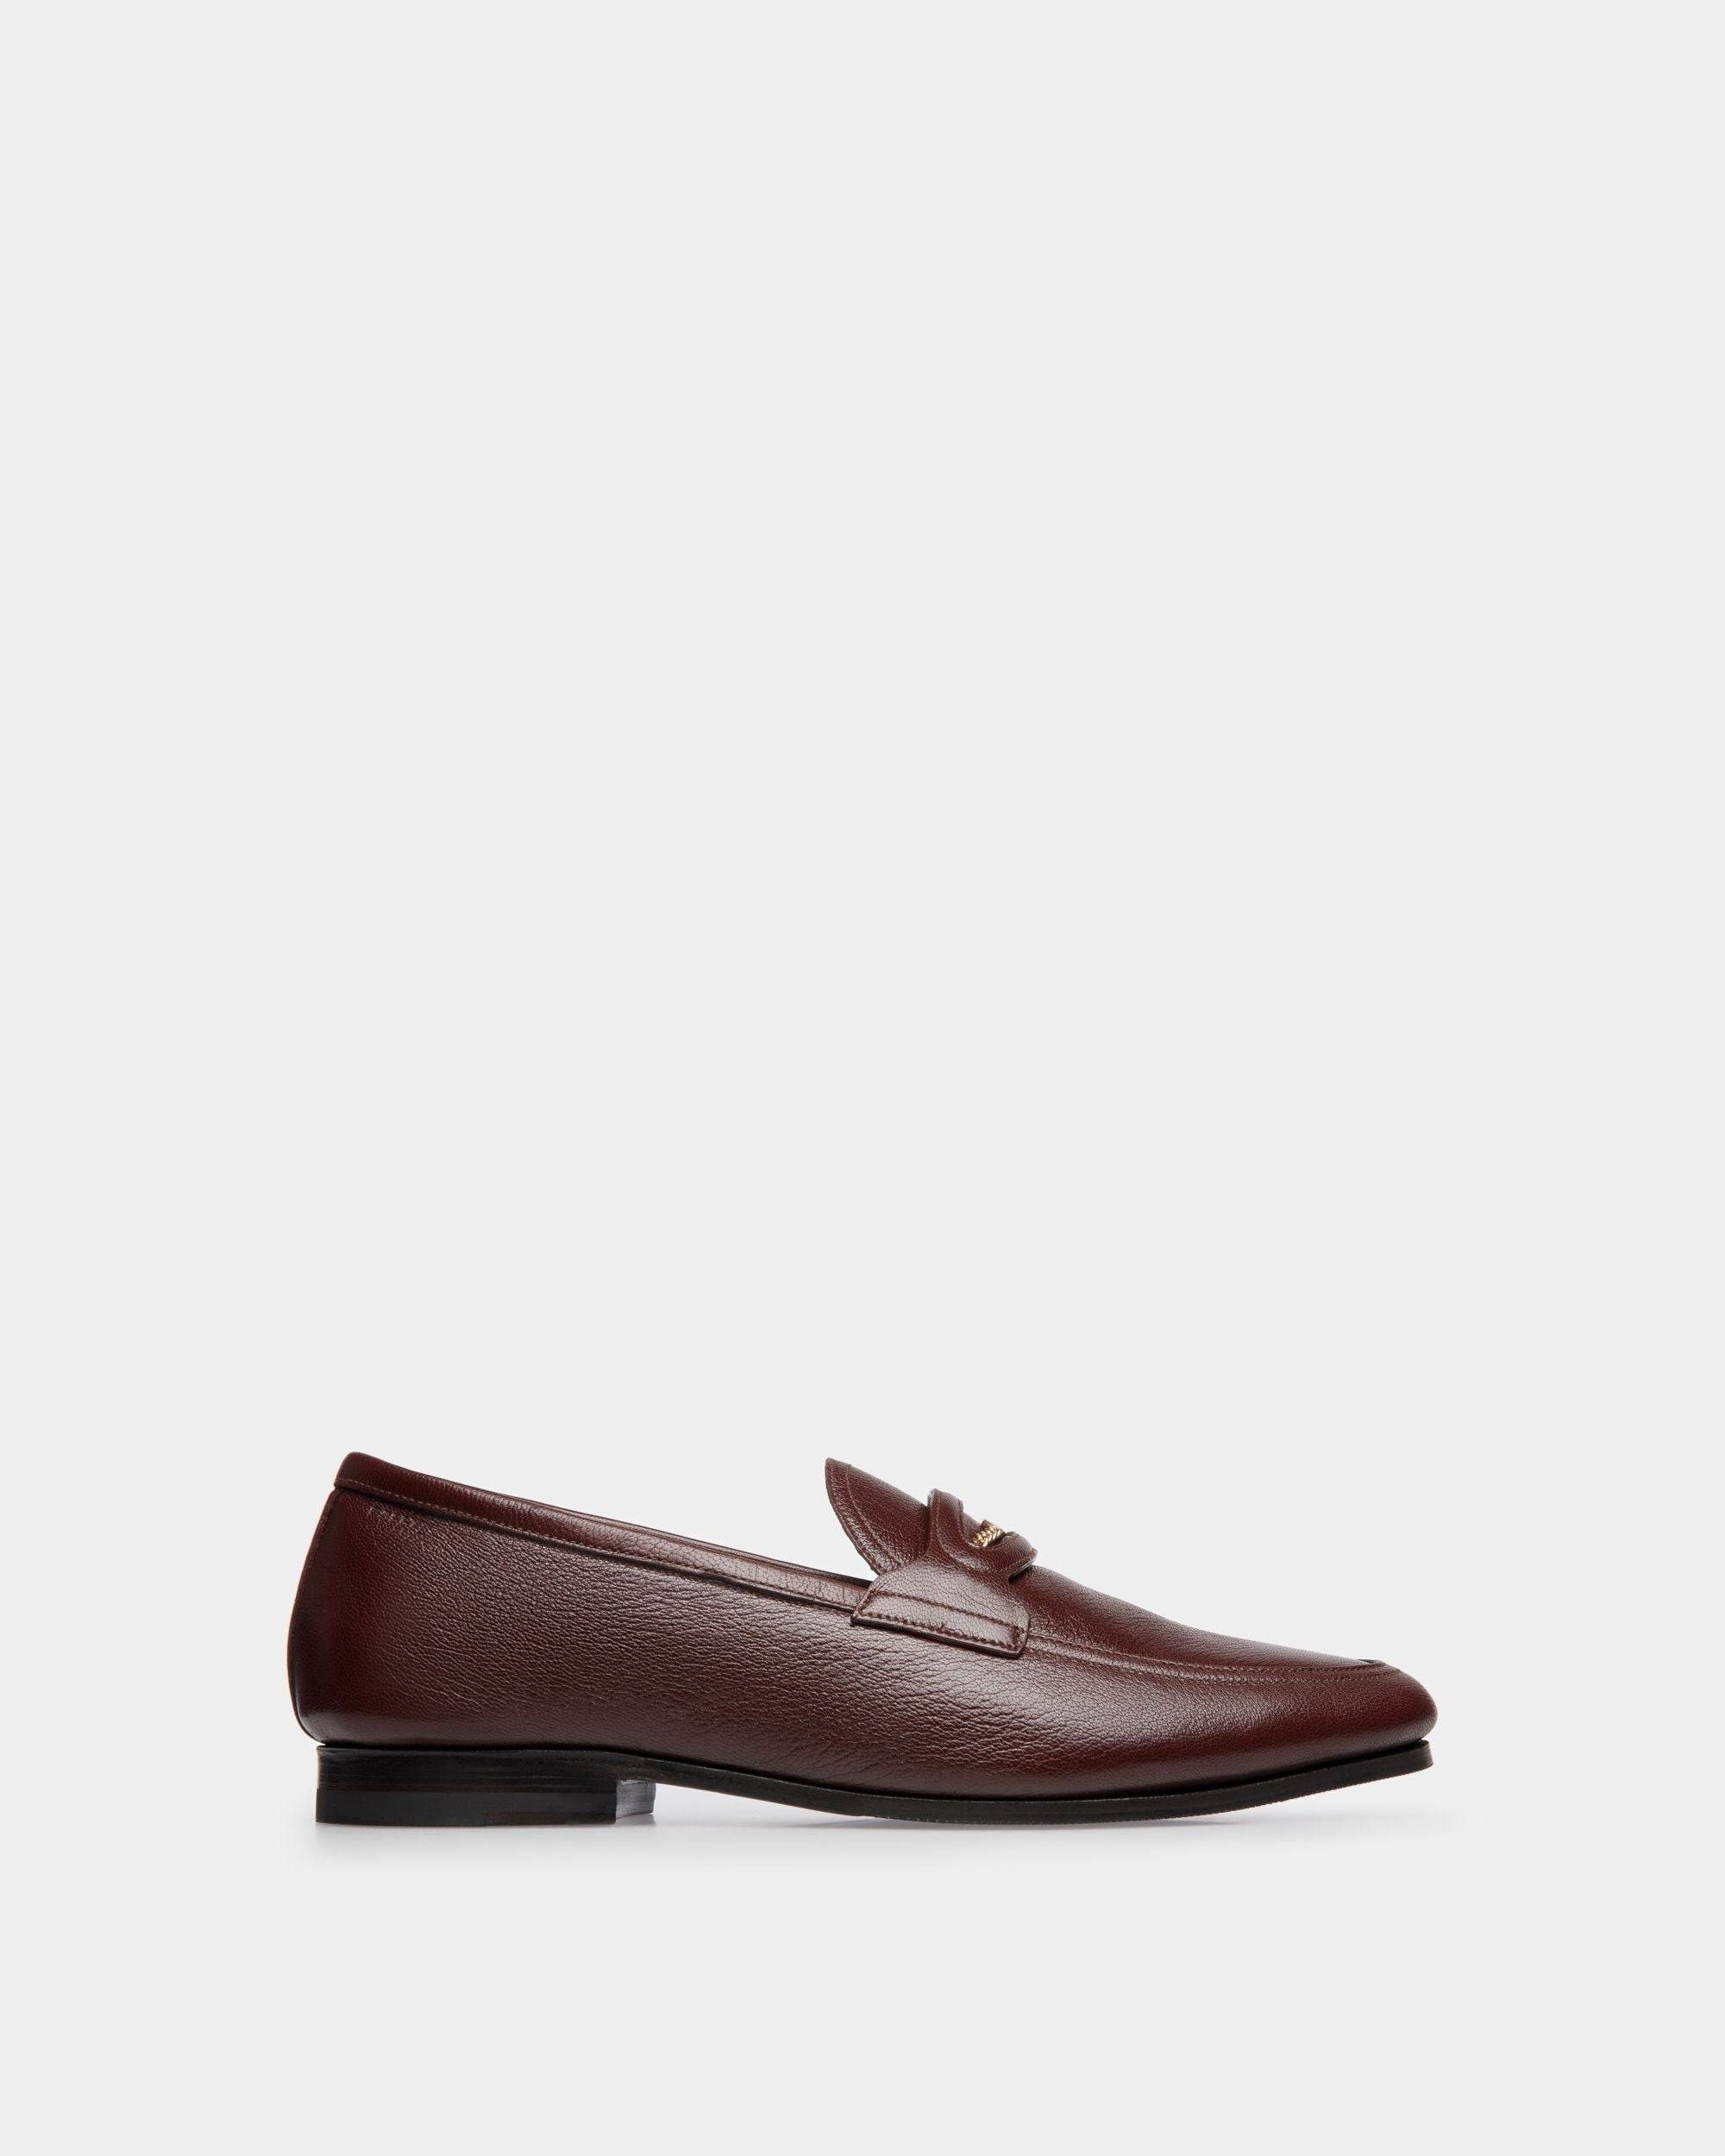 Plume | Men's Loafer in Chestnut Brown Grained Leather | Bally | Still Life Side